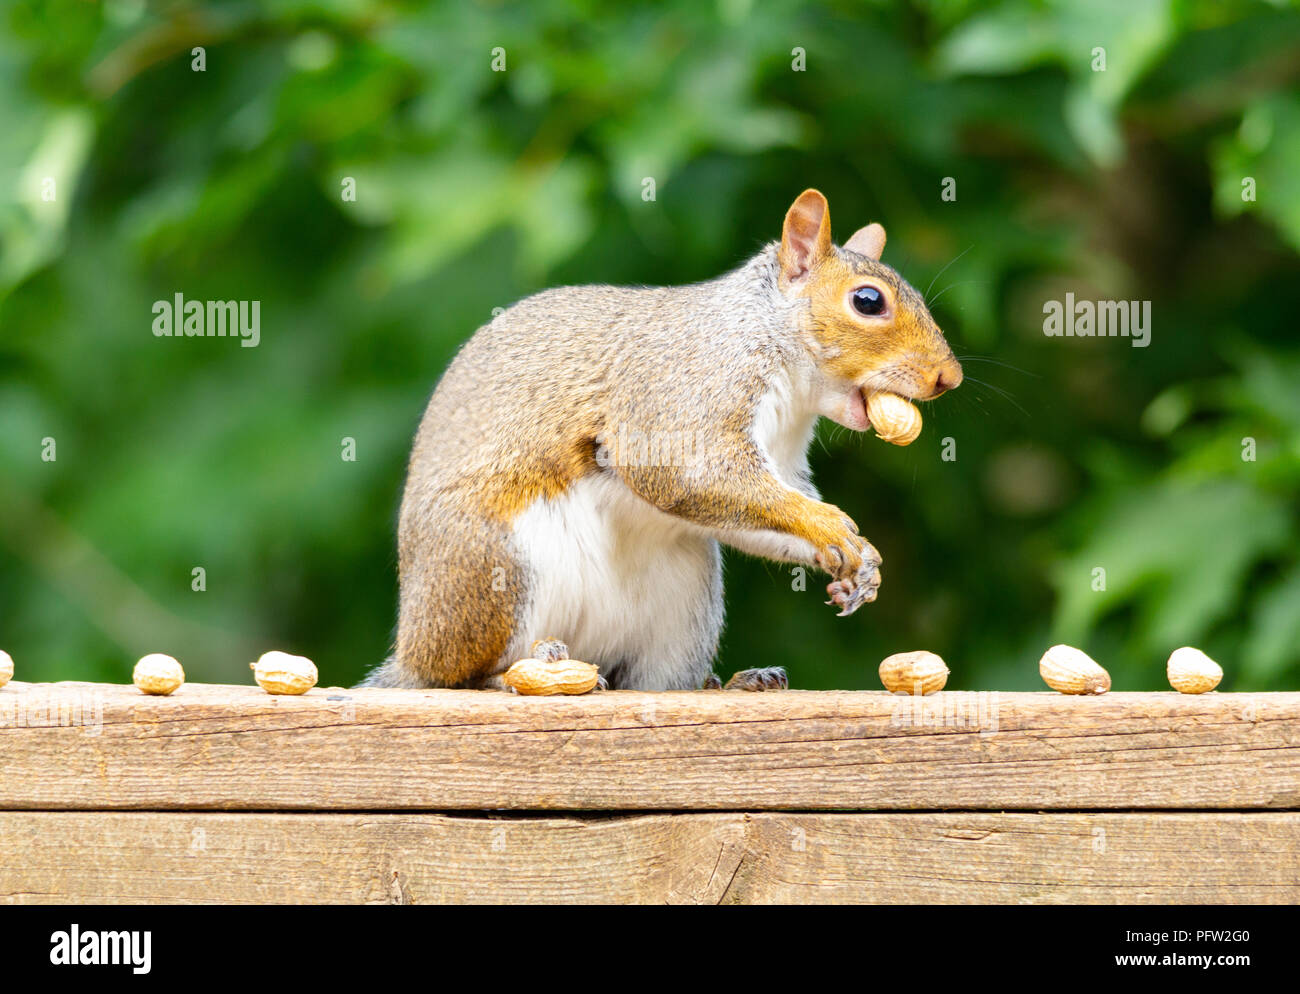 Side profile of a squirrel on a weathered deck railing, peanut in the shell in his mouth, against a blurred green foliage background. Stock Photo